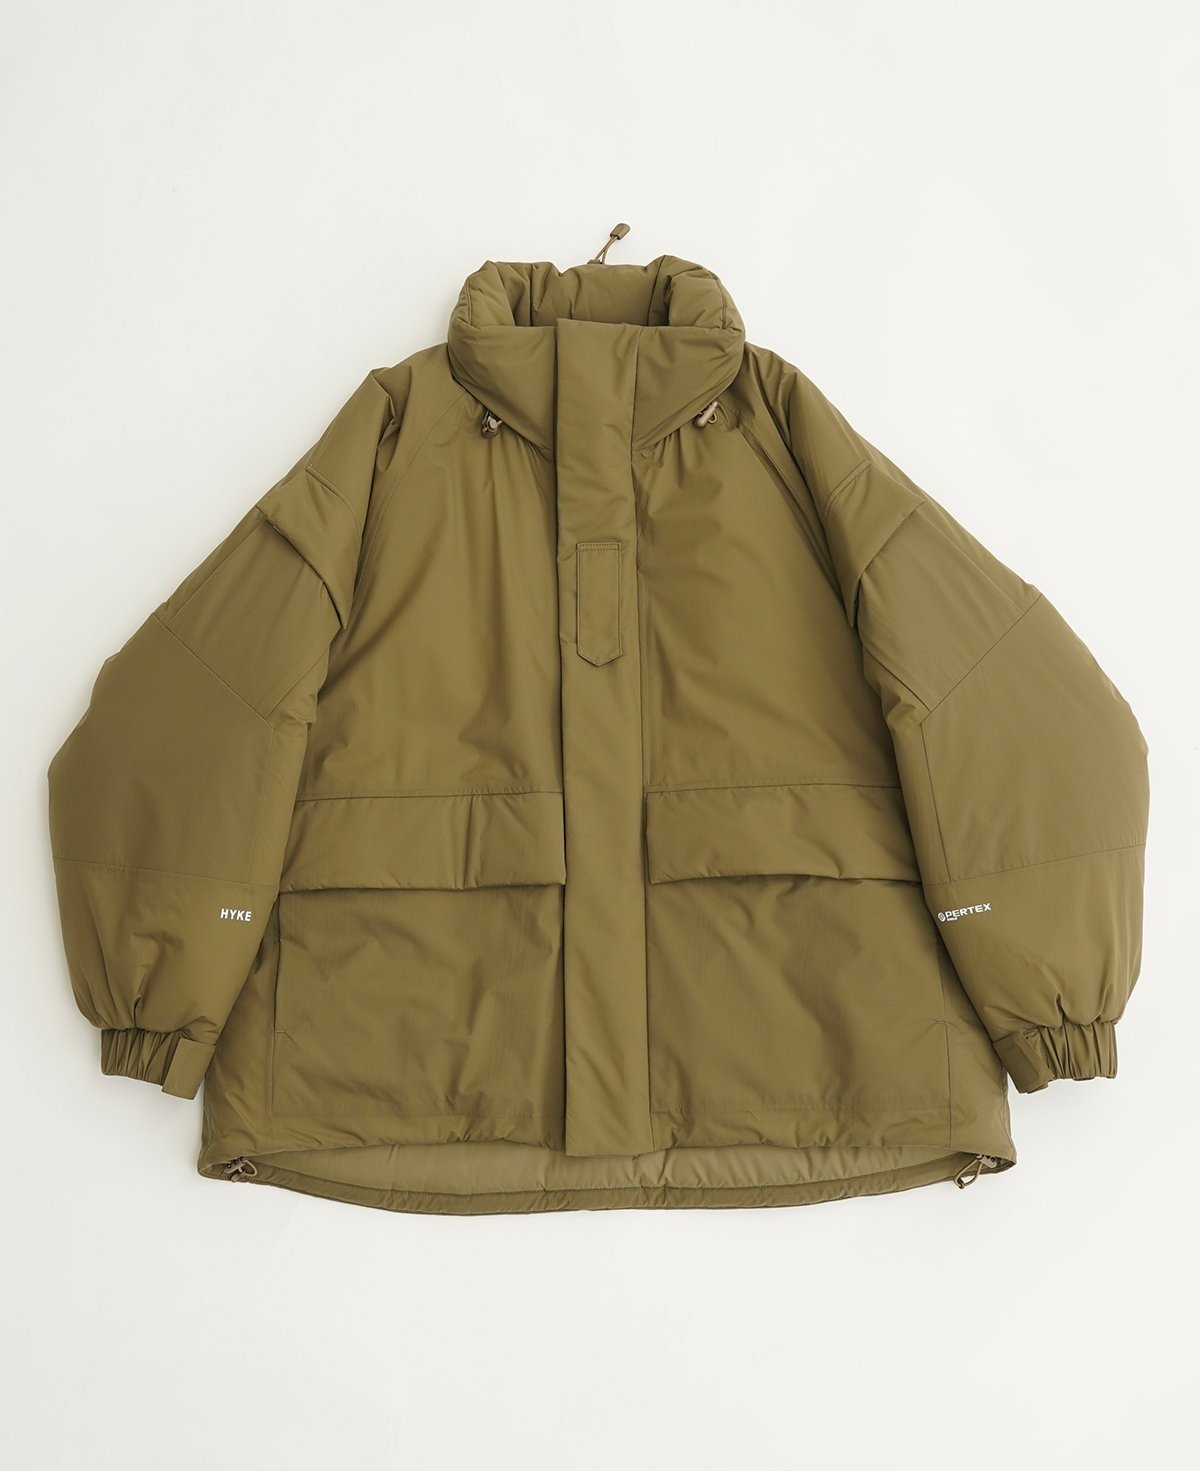 HYKE Launches Exclusive Outerwear Colourways for Edition and